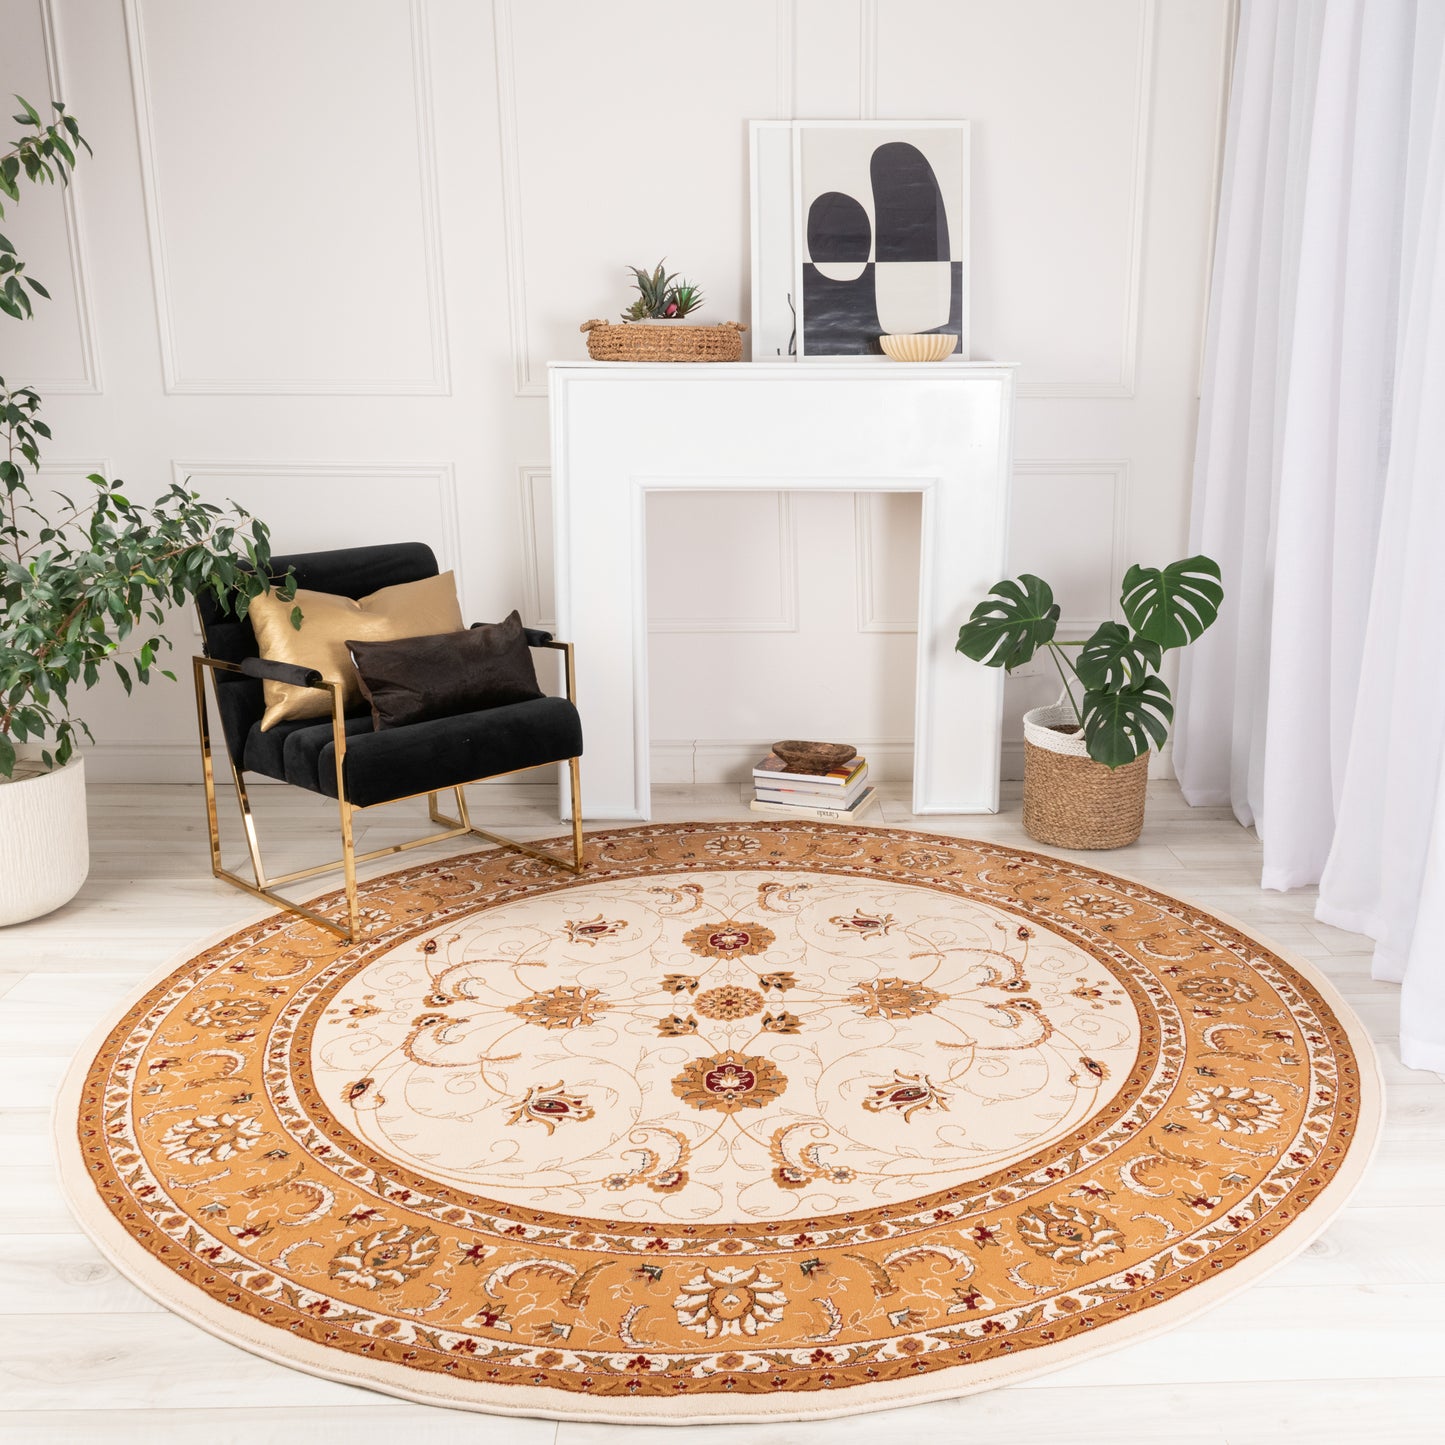 Tapis persan traditionnel beige majestueux